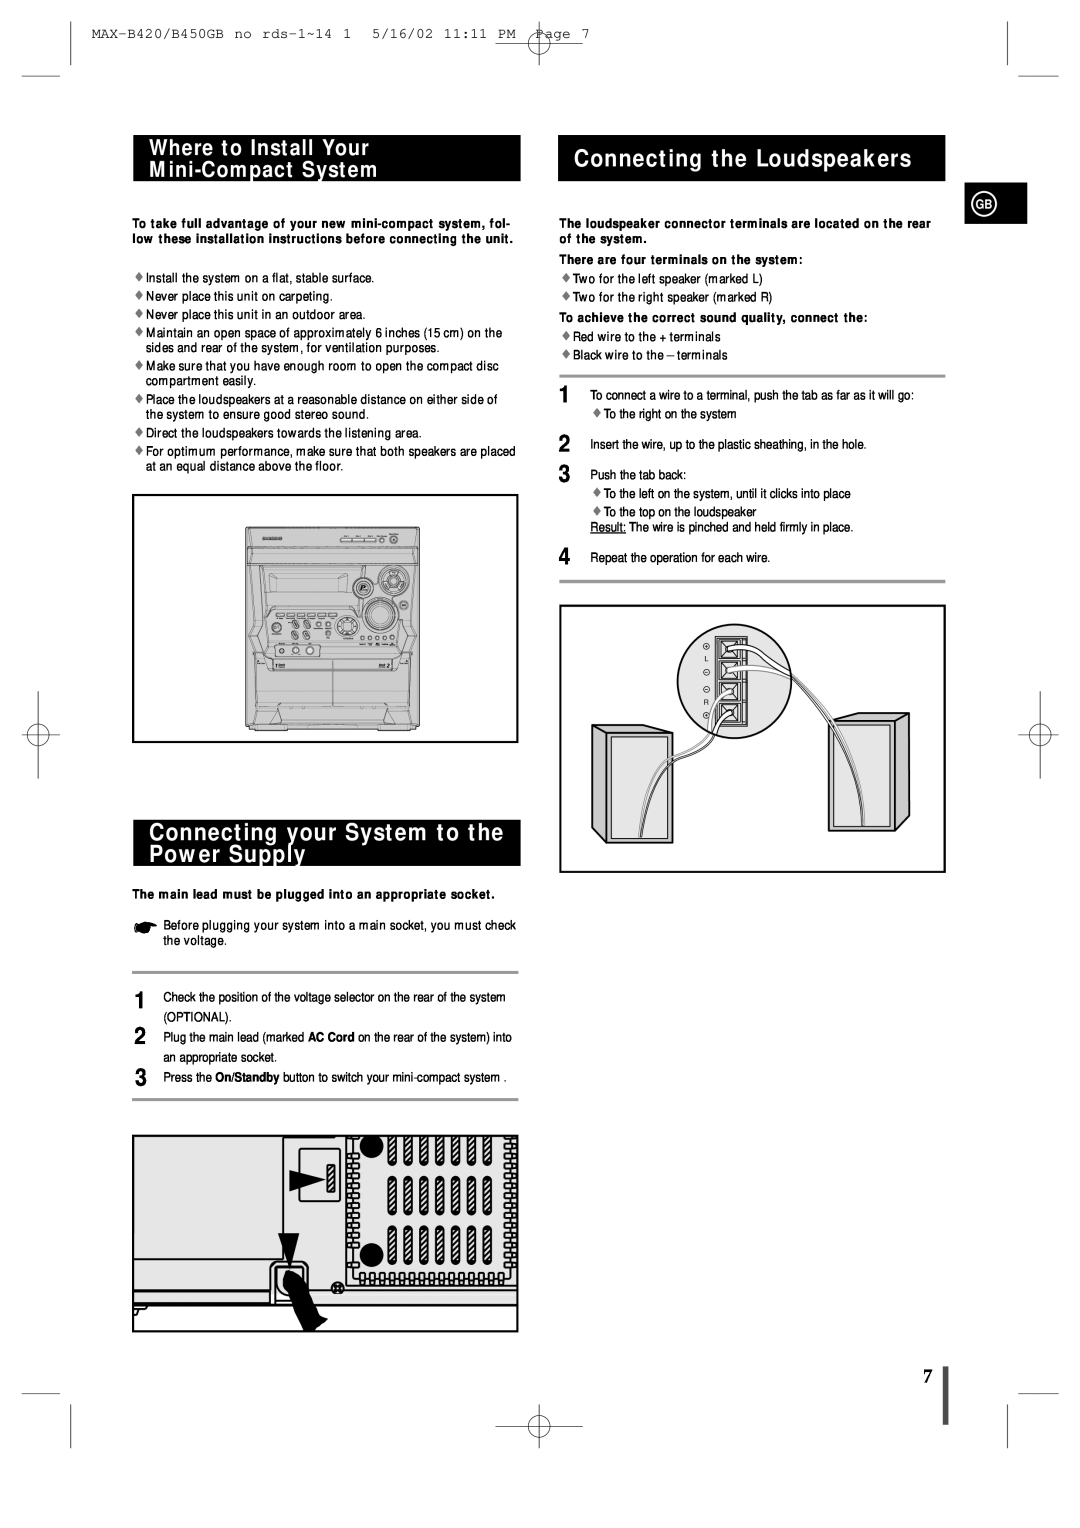 Samsung MAX-B450 instruction manual Connecting your System to the Power Supply, Connecting the Loudspeakers 